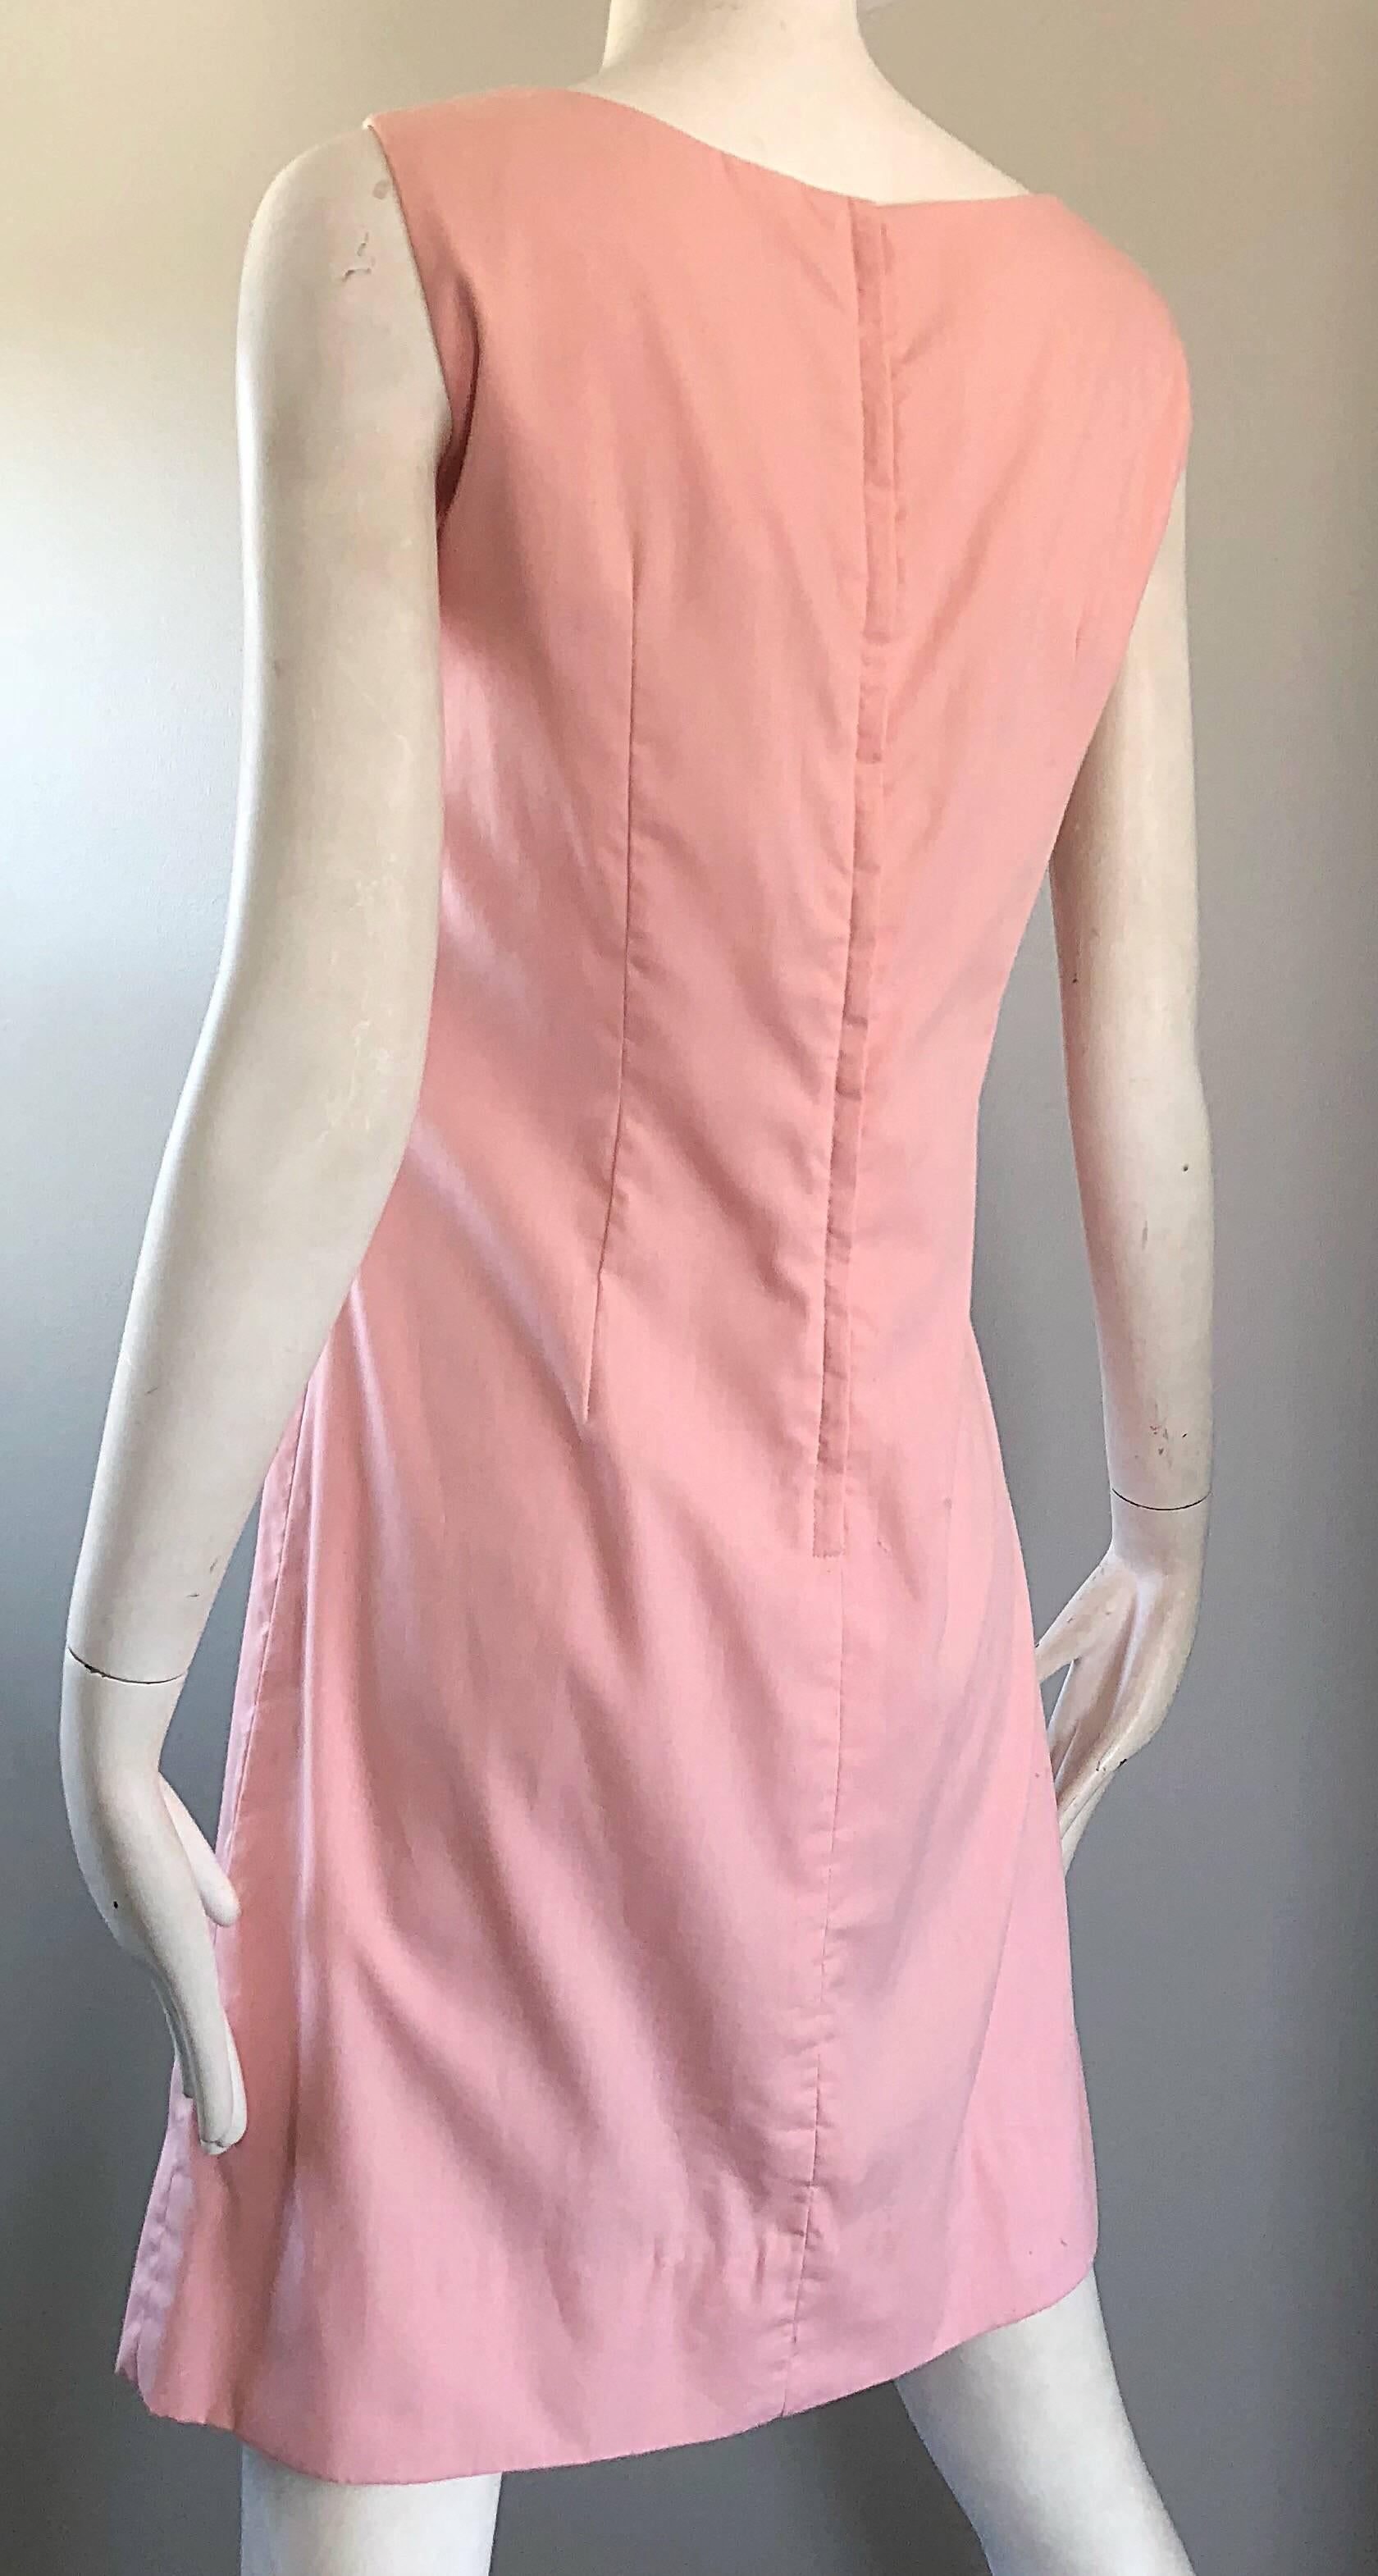 Chic 1960s Pale Pink Trees + Embrodiered Butterflies Novelty Vintage Shift Dress 7